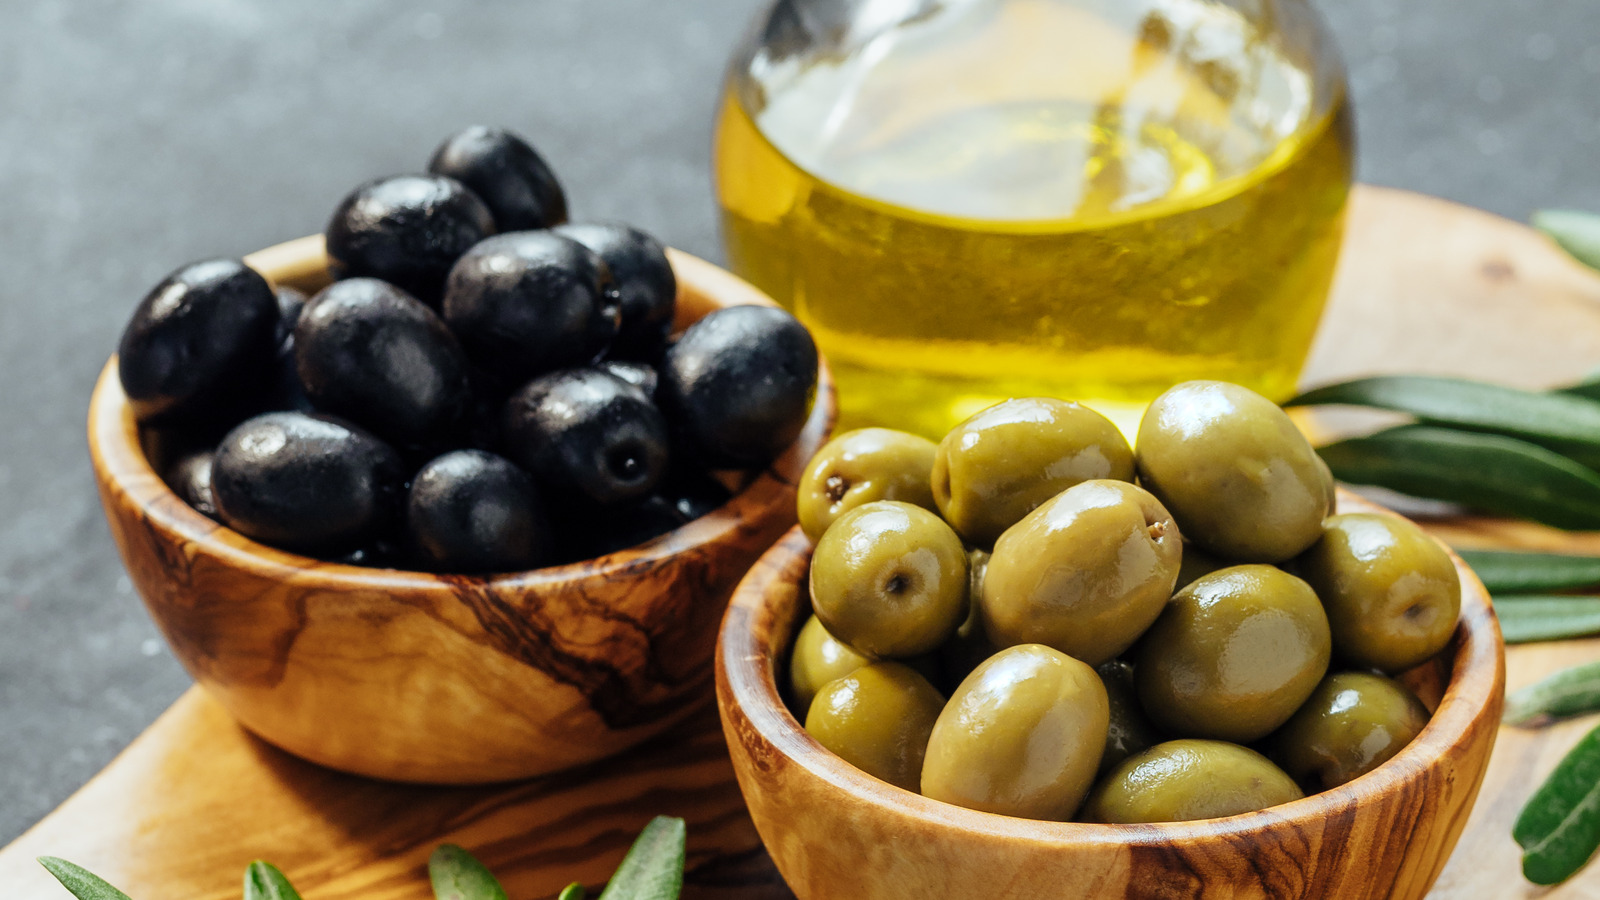 Are table olives good for you?